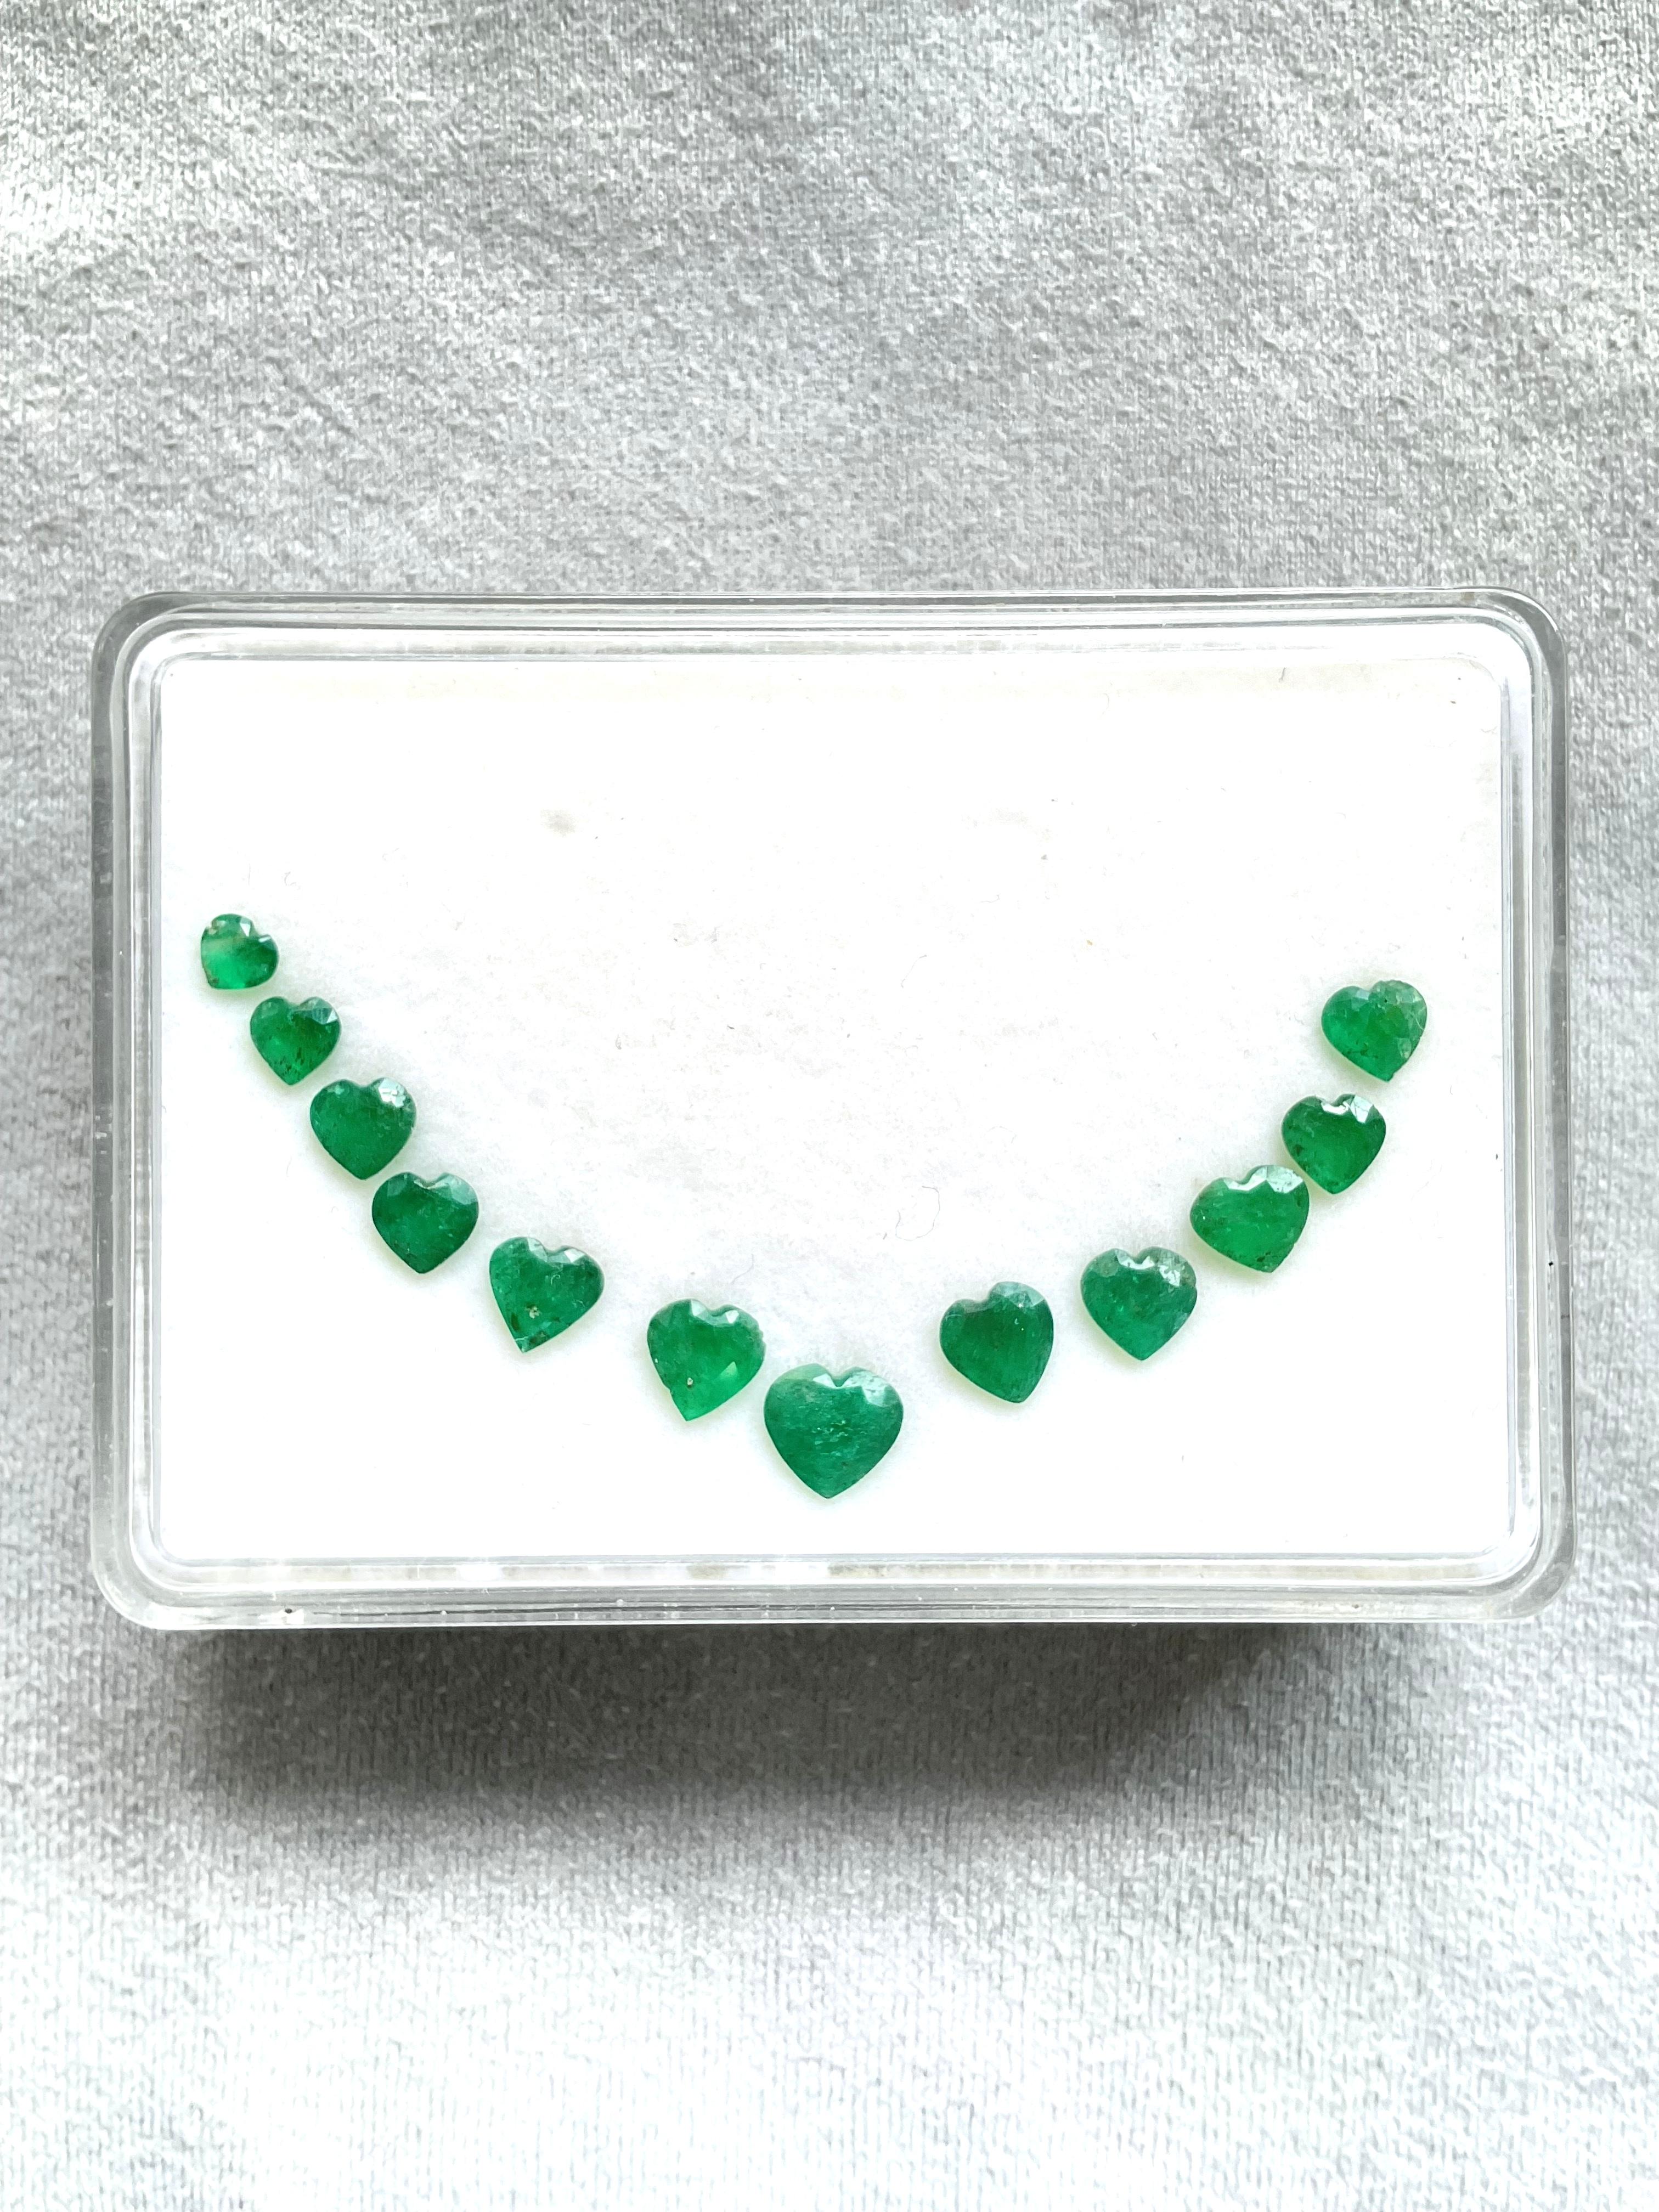 Art Deco Colombian Emerald Heart Layout 7.65 Carats Cutstone For Jewellery Natural Gems For Sale